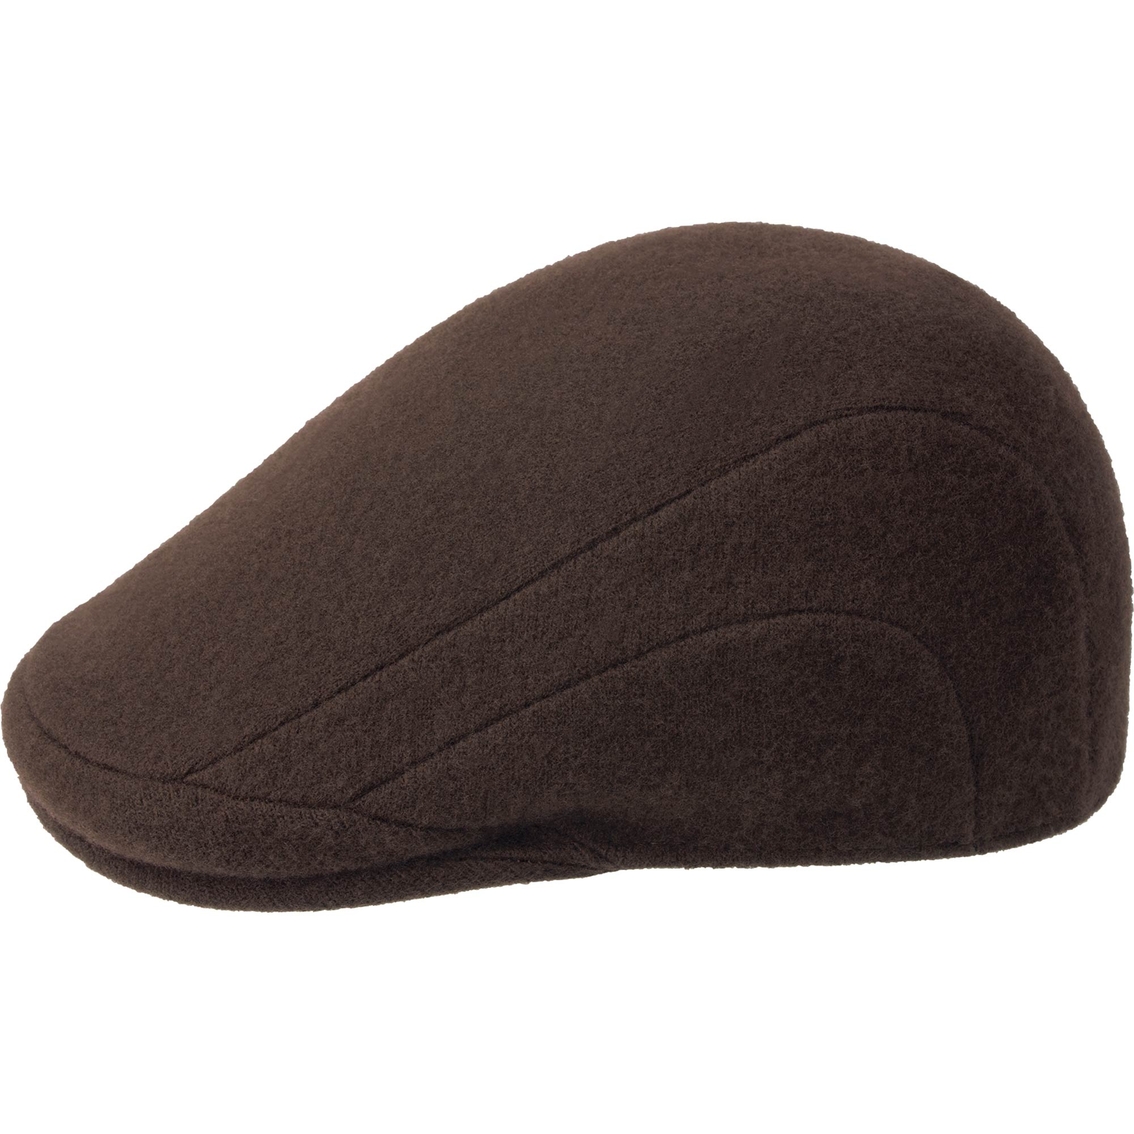 Kangol Wool 507 Cap | Hats | Father's Day Shop | Shop The Exchange